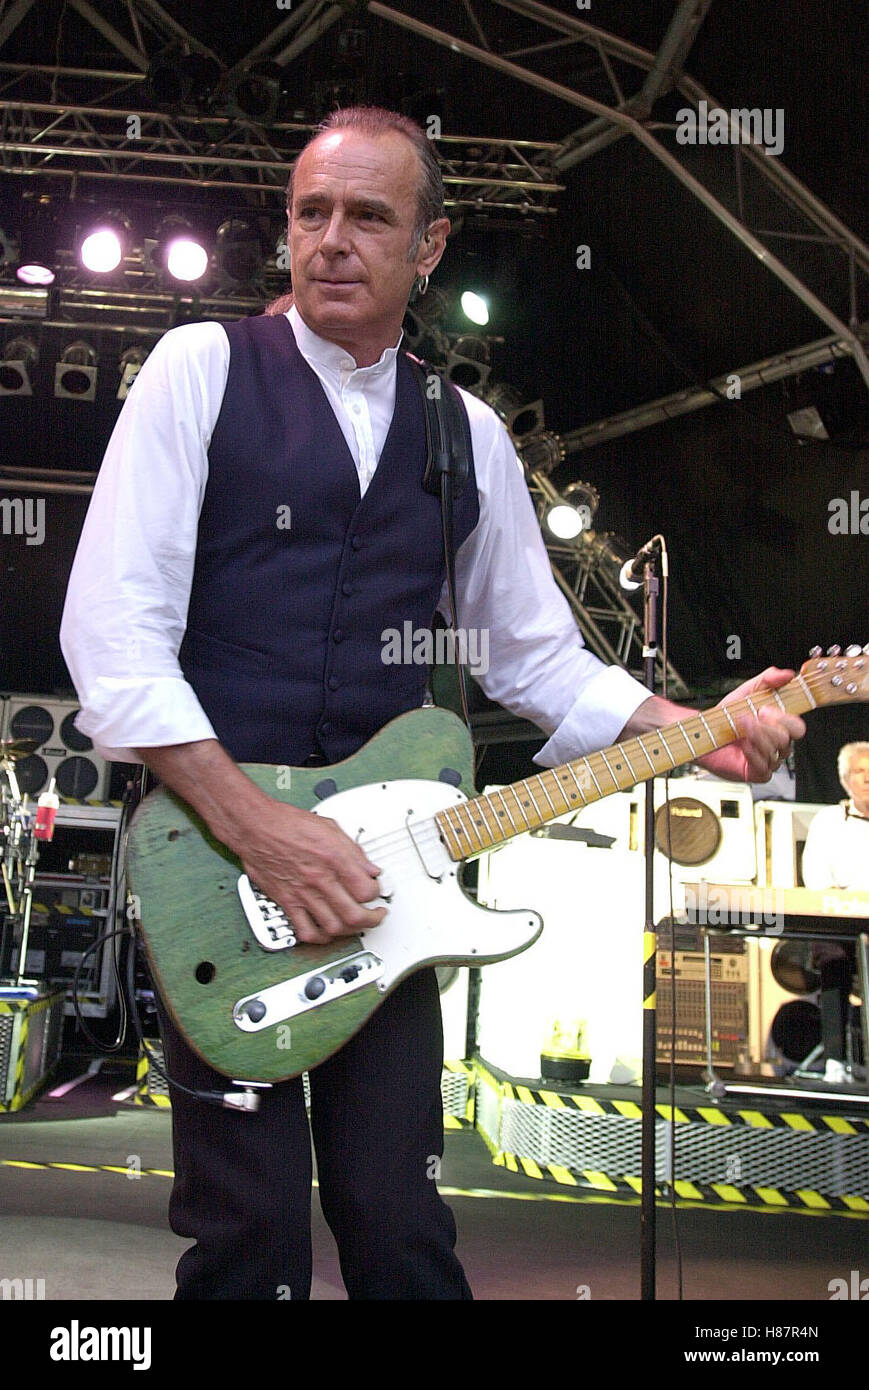 FRANCIS ROSSI STATUS QUO DALBY FOREST PICKERING N. YORKS 22 Juin 2003 Banque D'Images